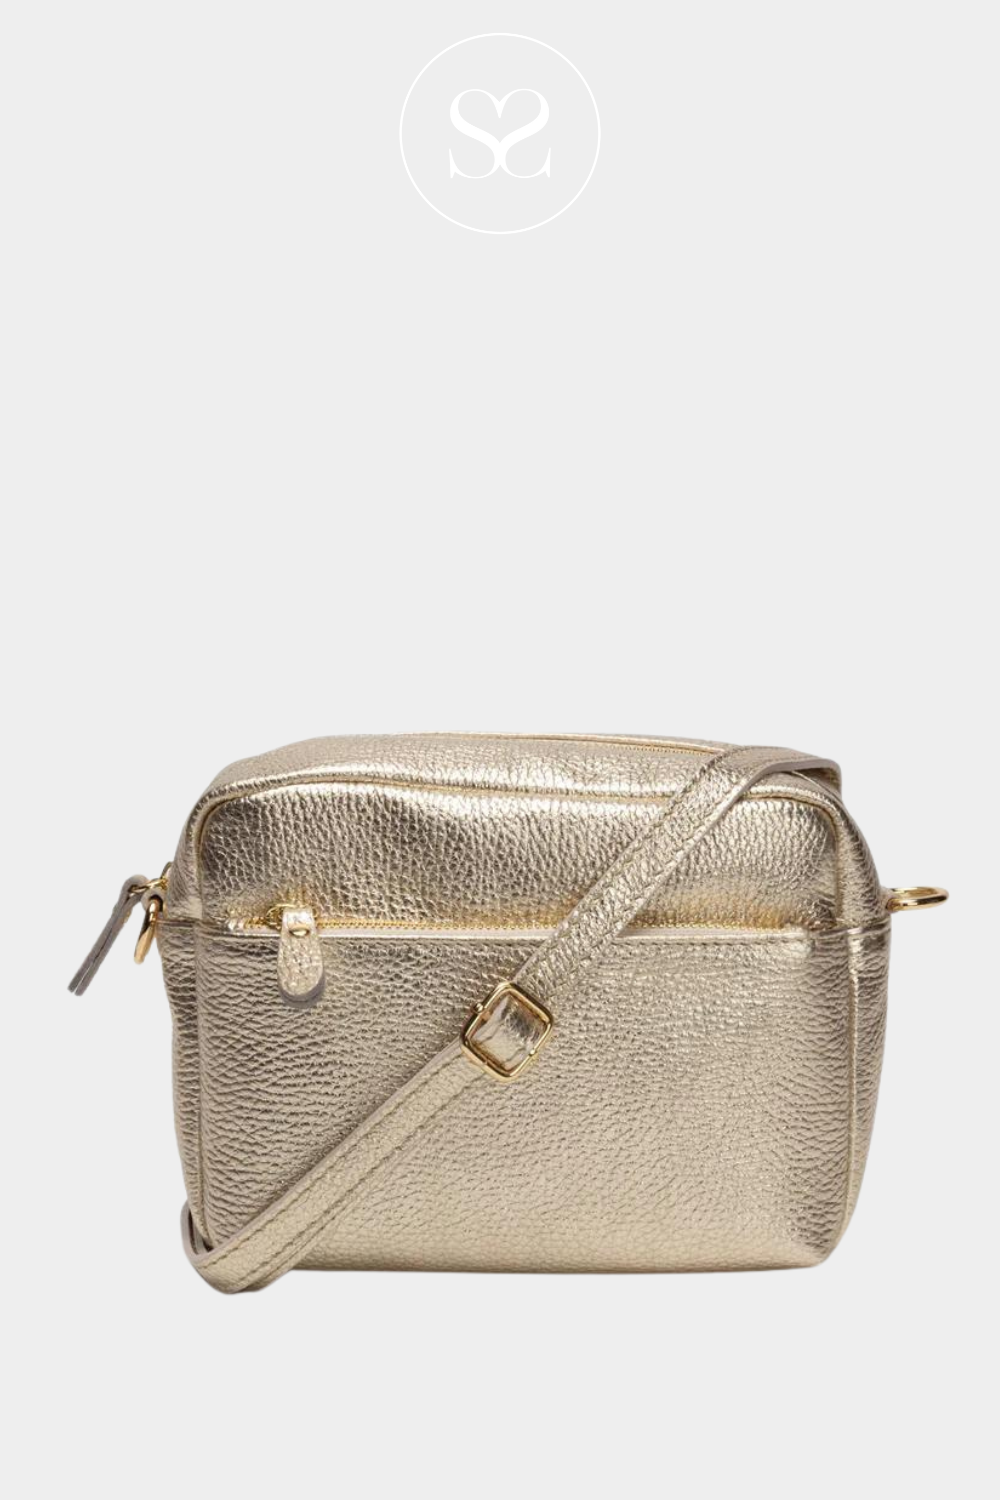 elie beaumont crossbody town bag in gold leather